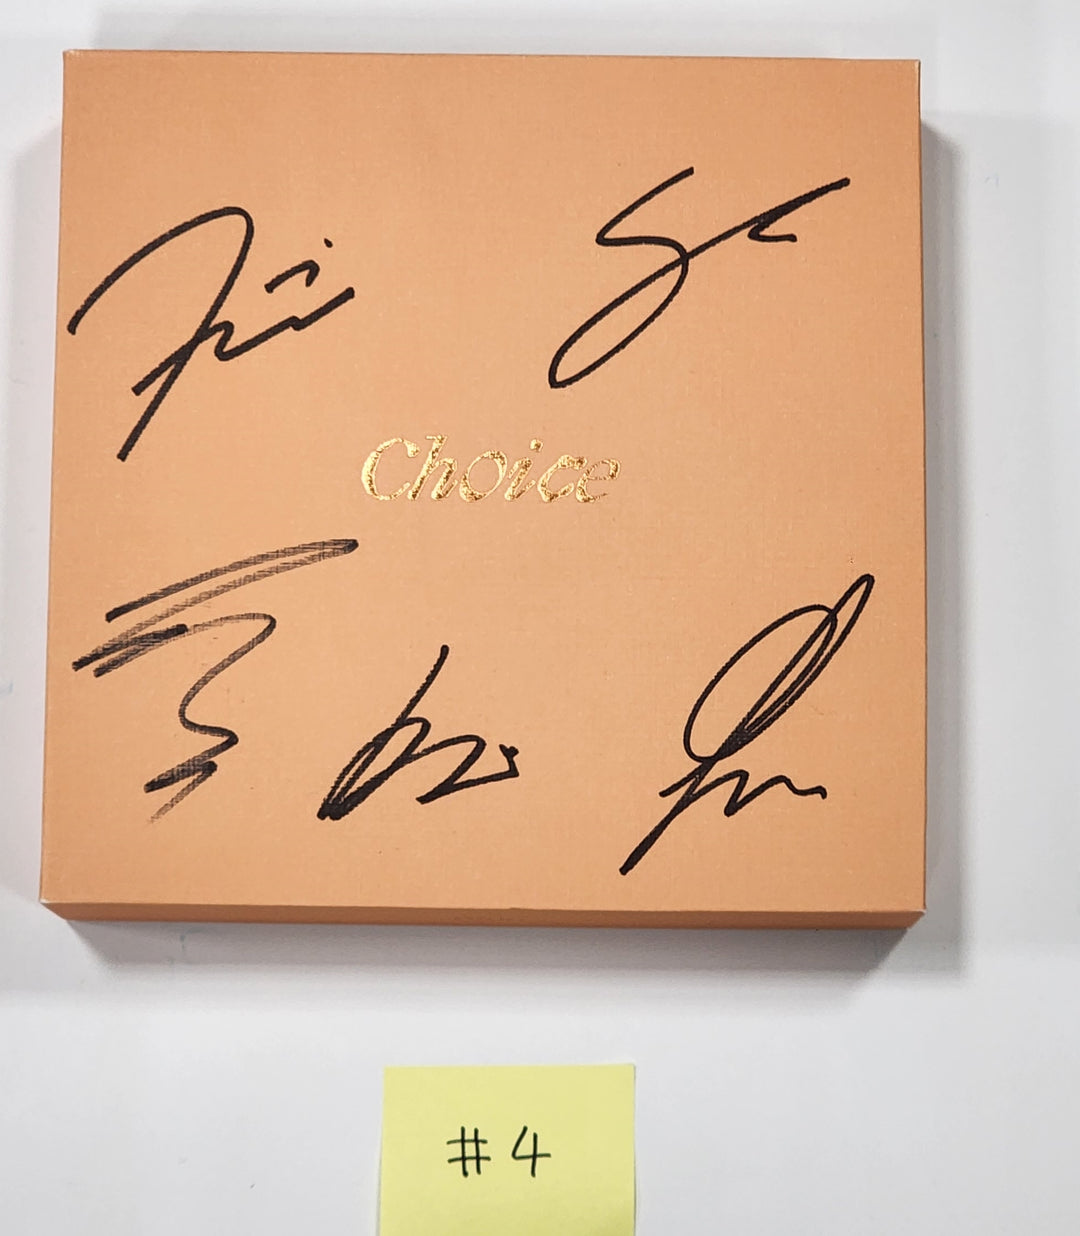 Victon "choice" - Hand Autographed(Signed) Promo Album